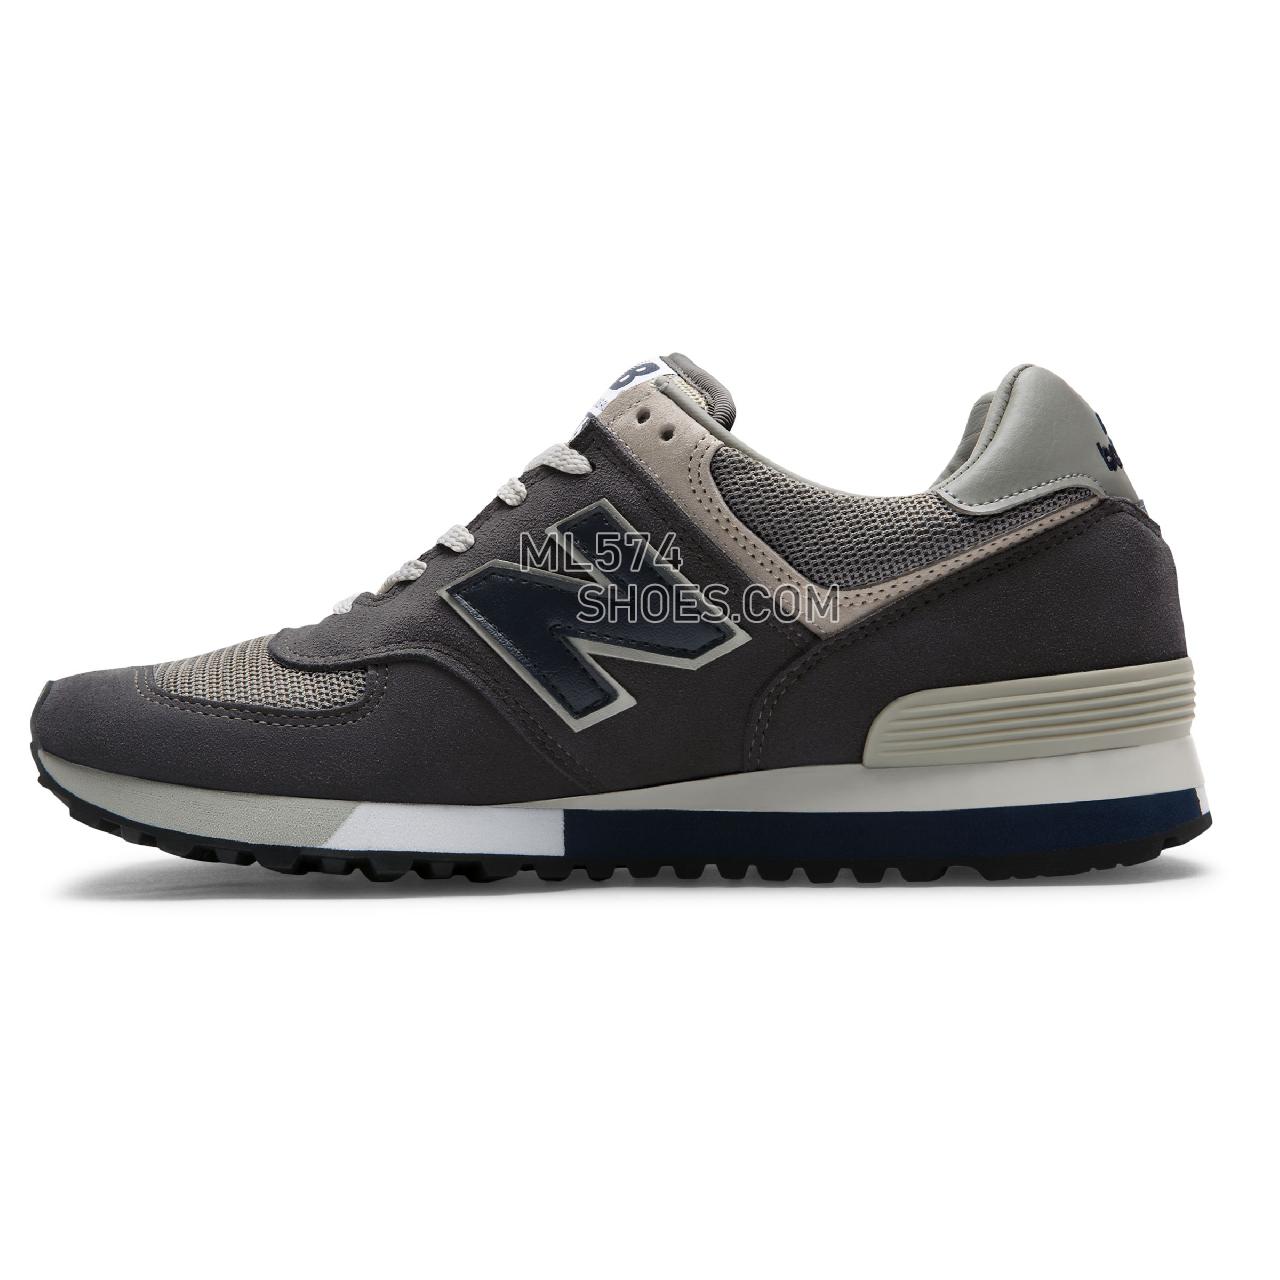 New Balance 576 Made in UK - Men's 576 - Classic Grey with Navy - OM576OGG